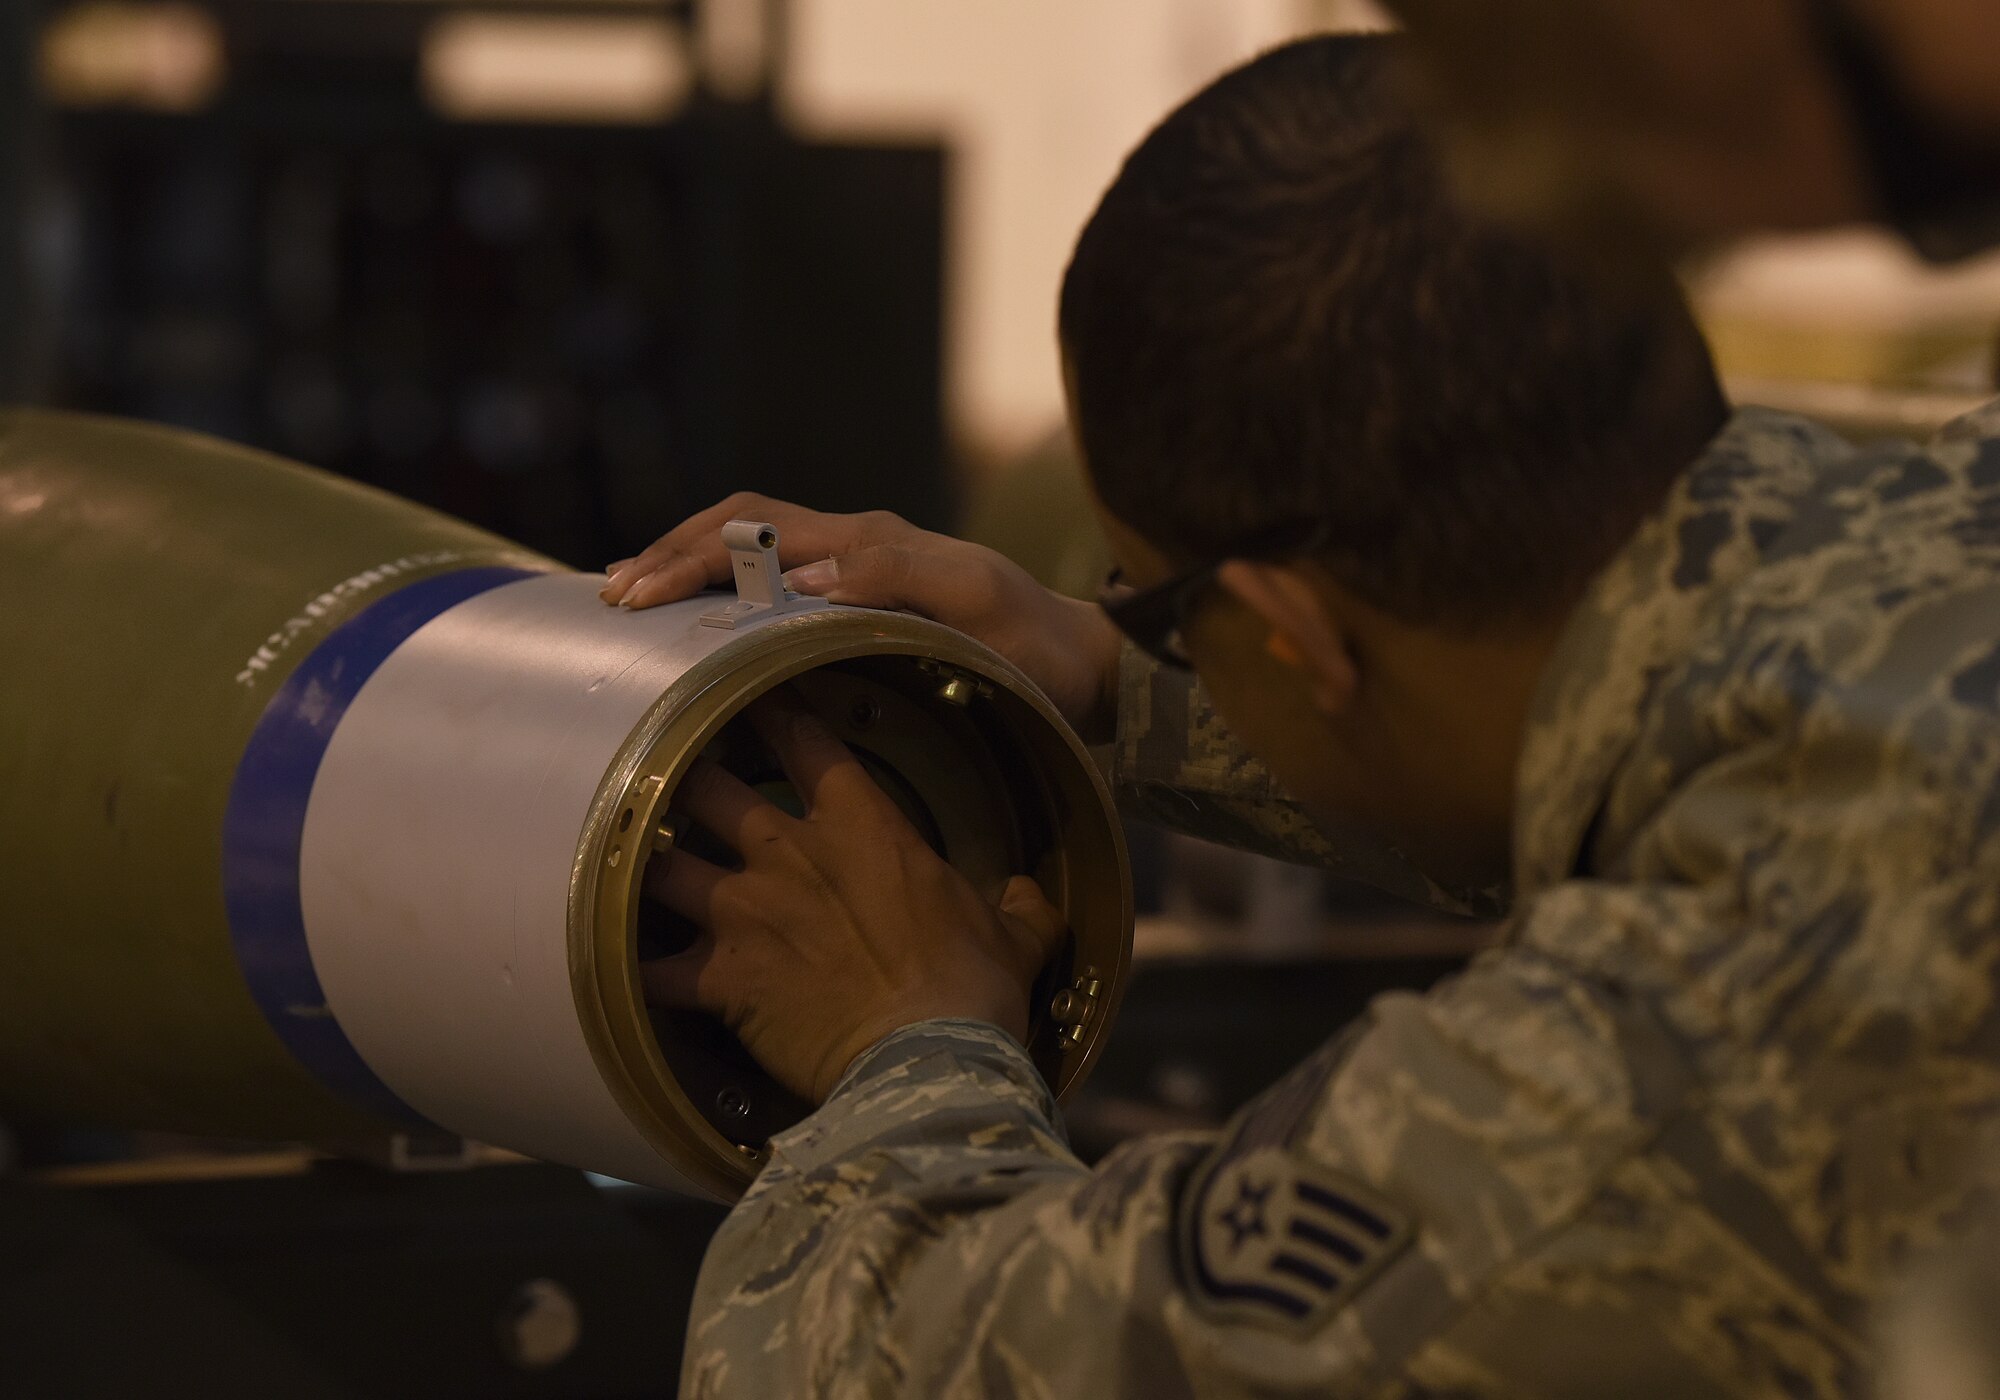 Staff Sgt. Deion Montana-Graham, 48th Munitions Squadron conventional maintenance supervisor, installs the front collar of an inert weapon at Royal Air Force Lakenheath, England, Jan. 23, 2019. The 48th MUNS team will be evaluated by a team from USAFE-AFAFRICA headquarters here Feb. 6.  (U.S. Air Force photo by Airman 1st Class Madeline Herzog)